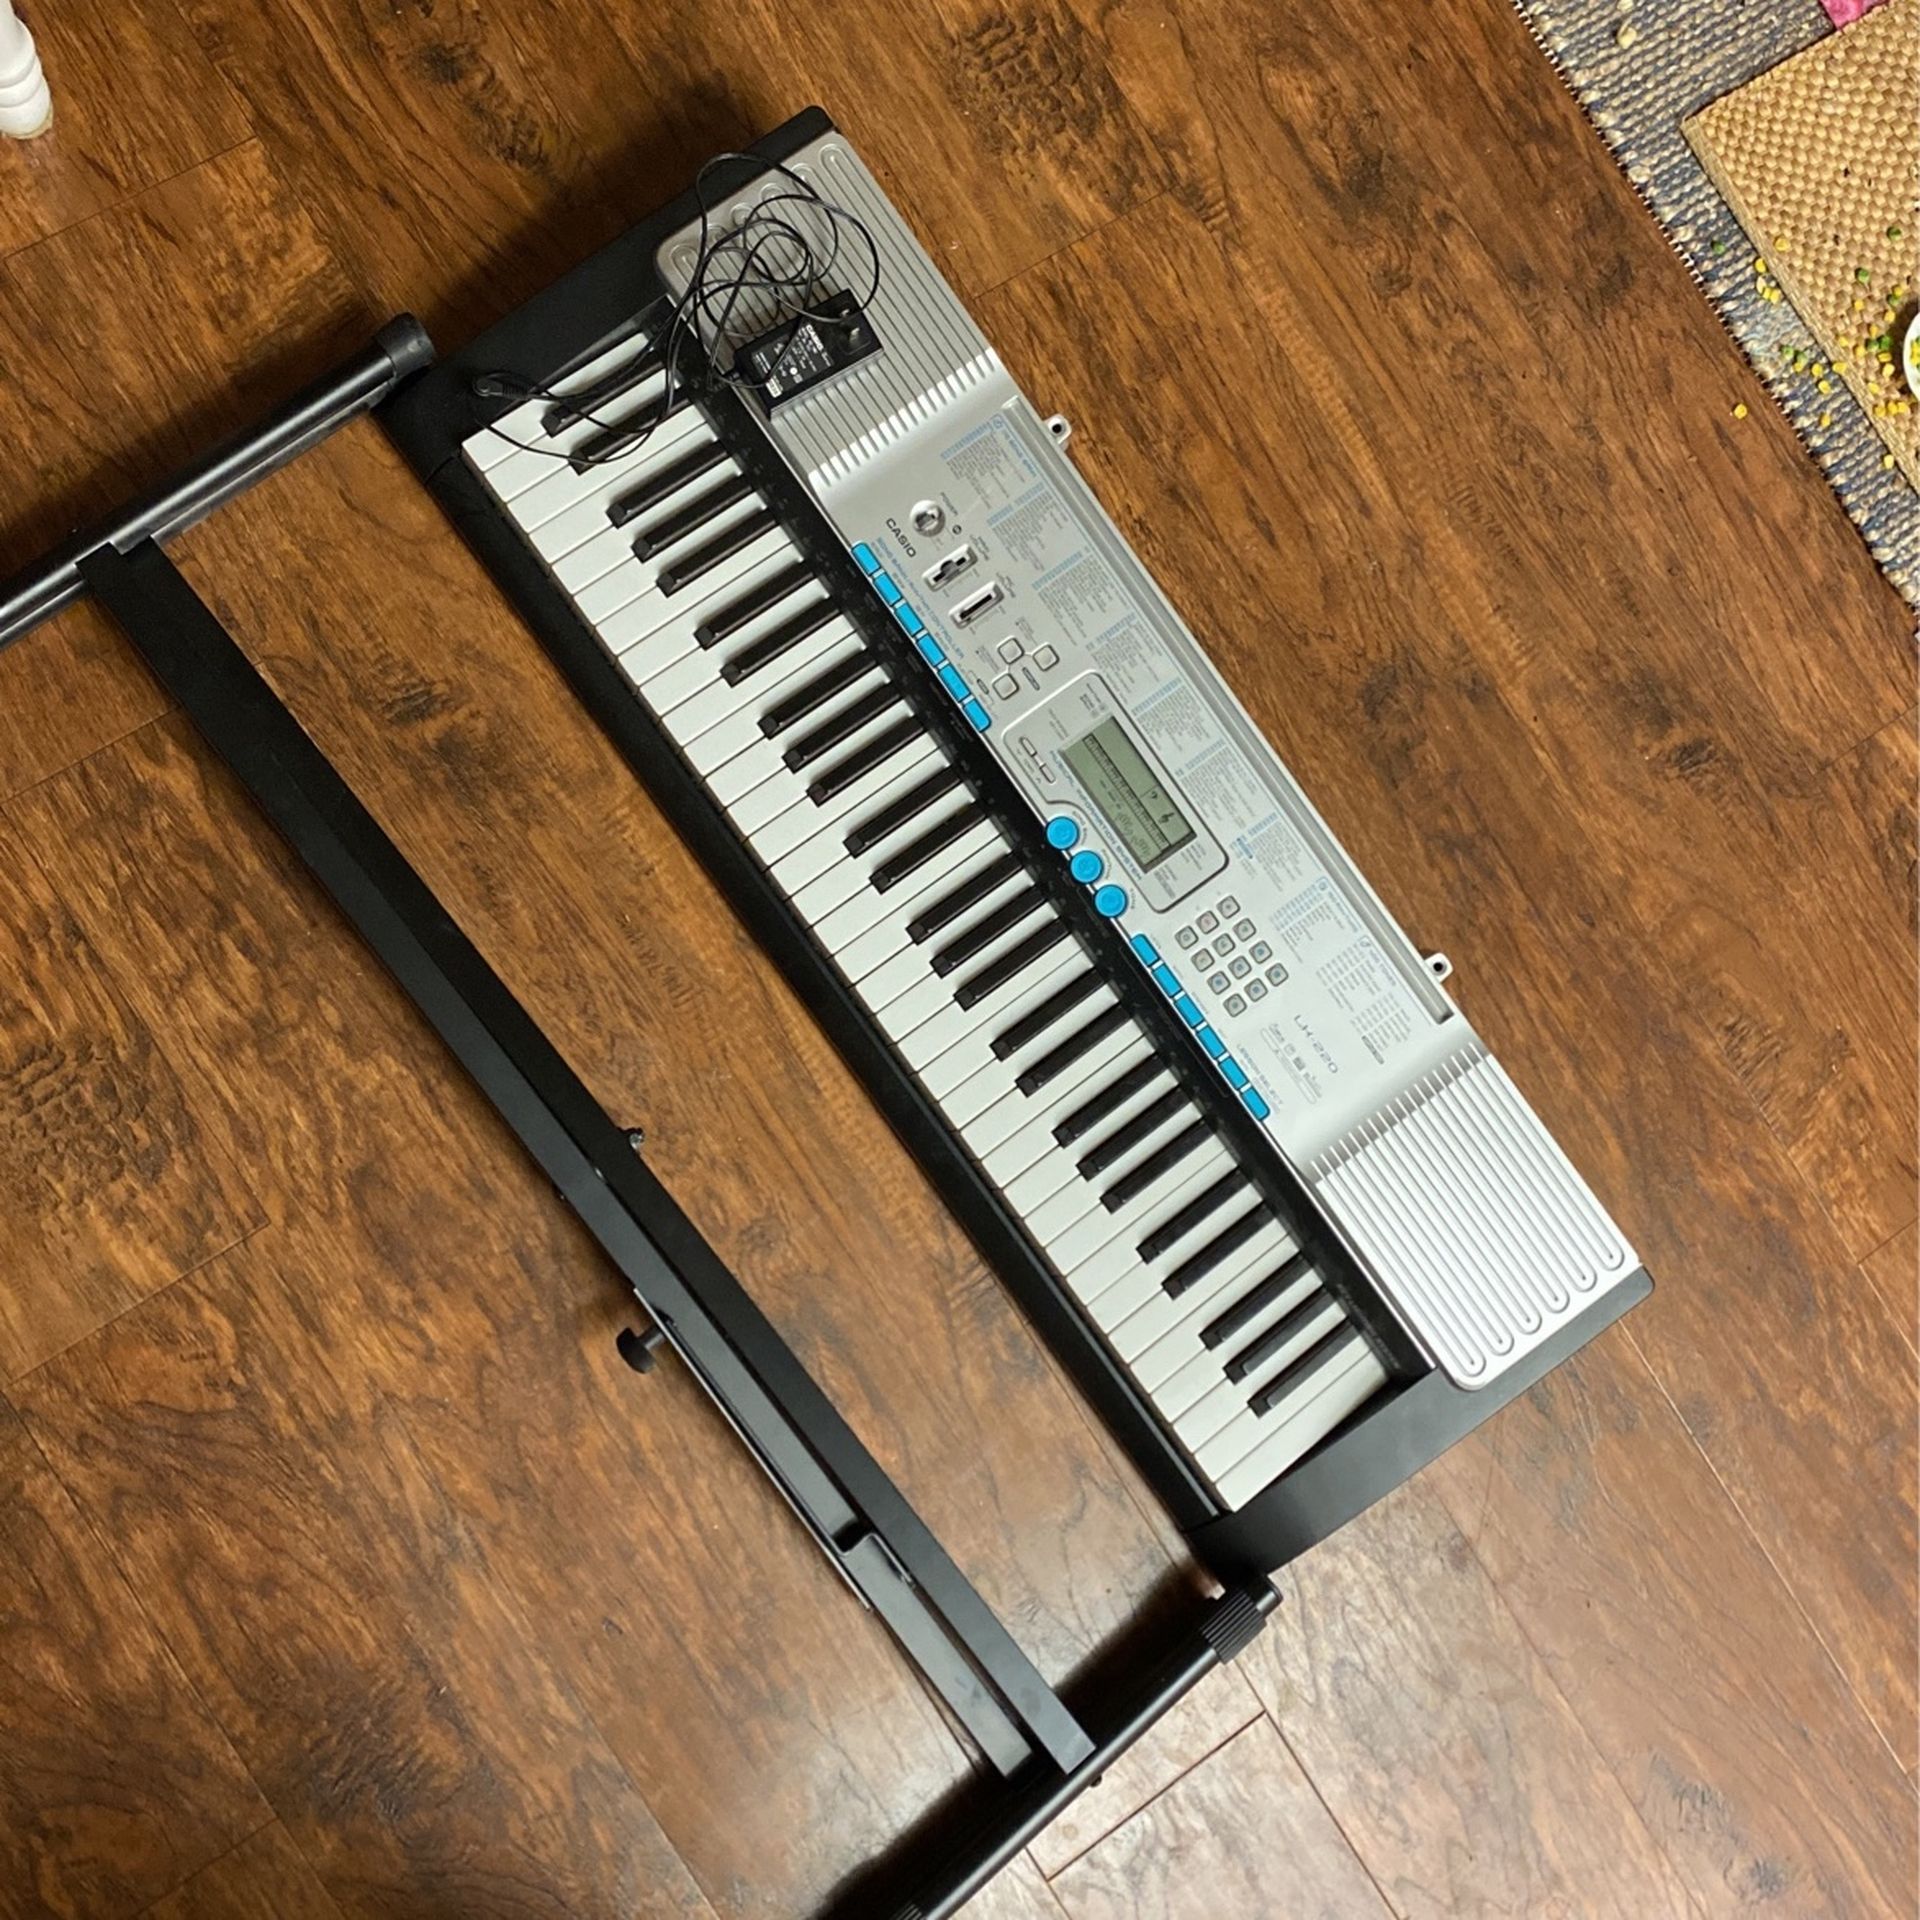 Casio LK-220 with cable and stand